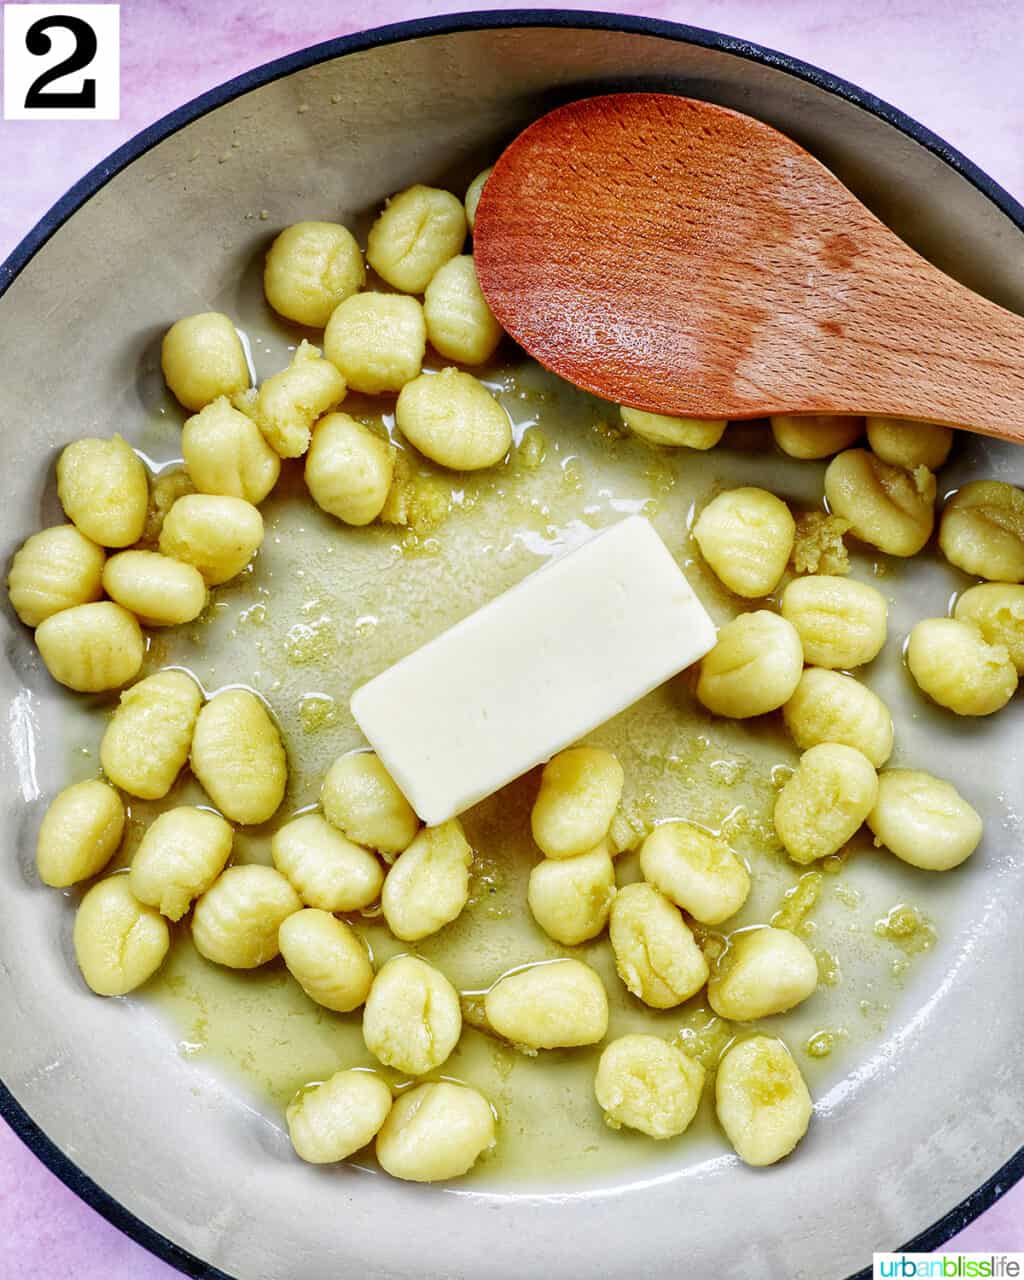 gnocchi and butter cooking together in a skillet.